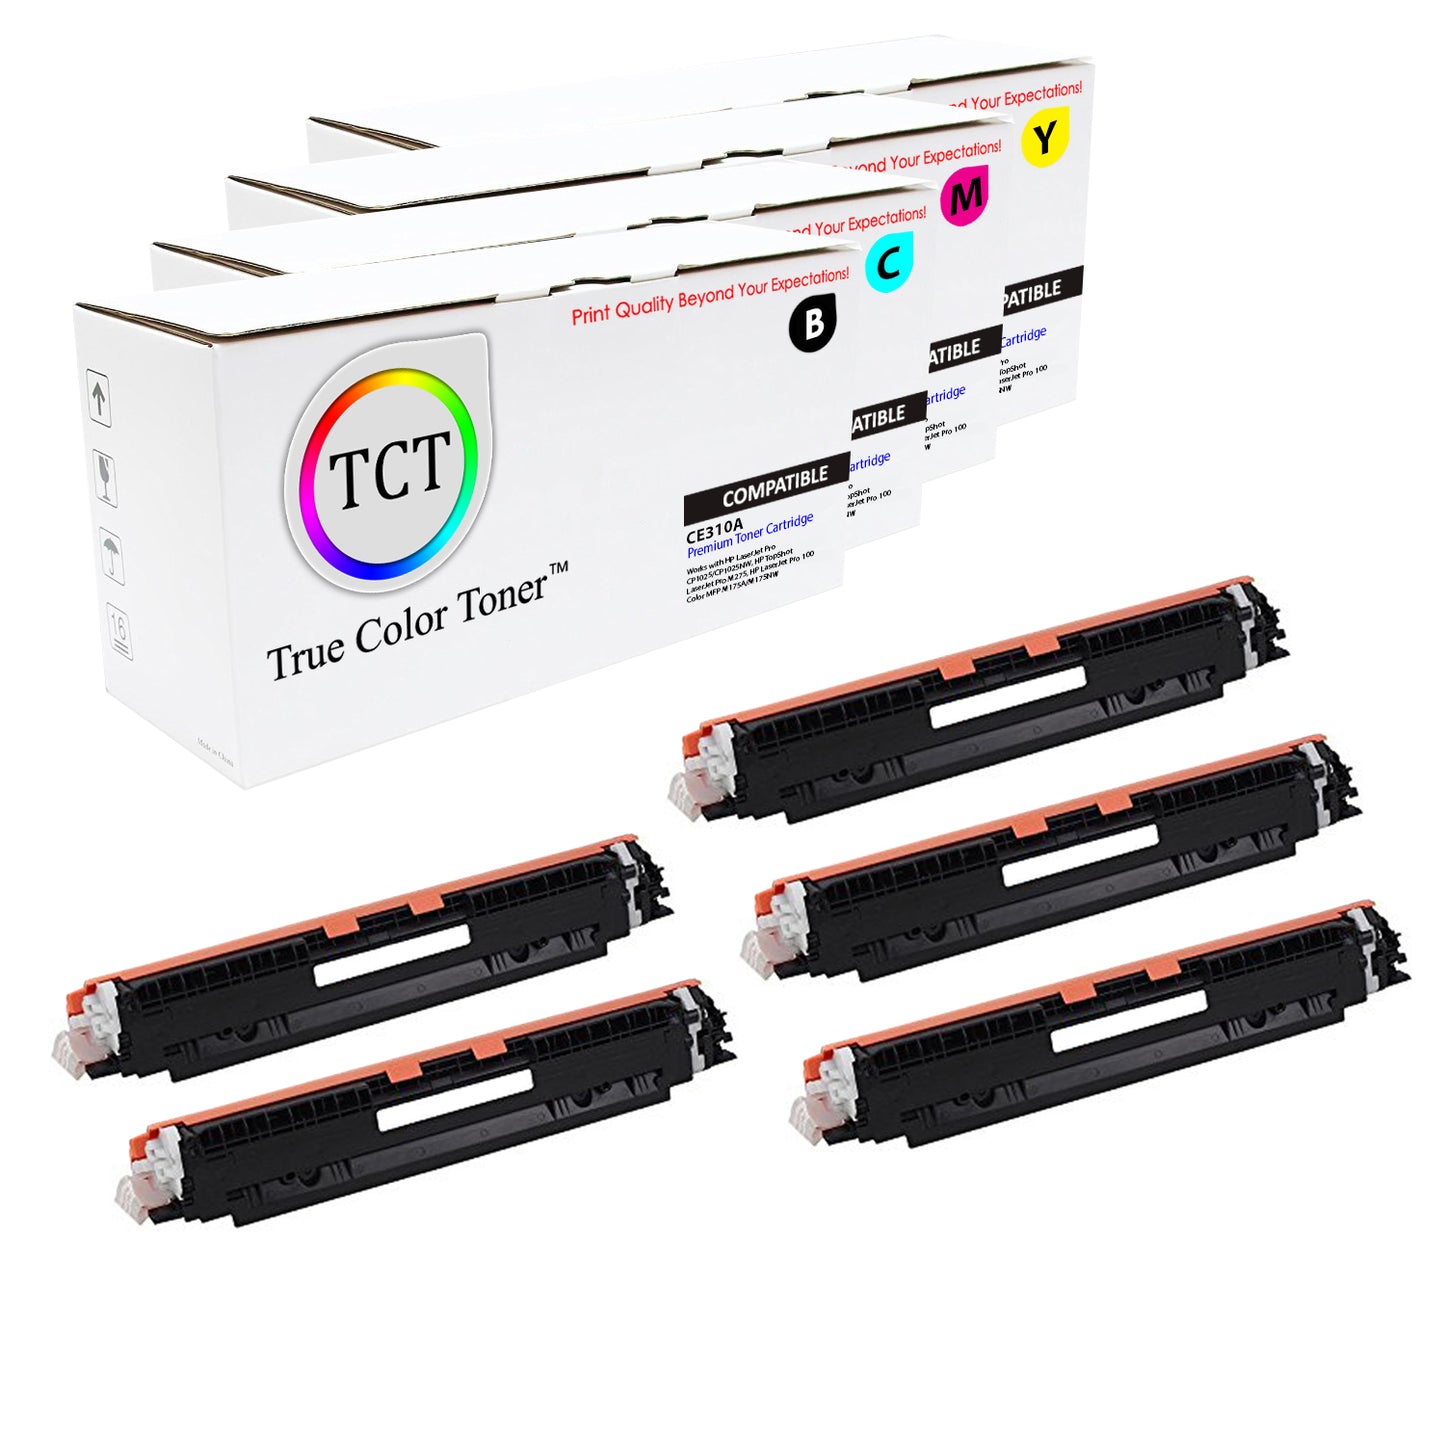 TCT Compatible Toner Cartridge Replacement for the HP 126A Series - 5 Pack (BK, C, M, Y)